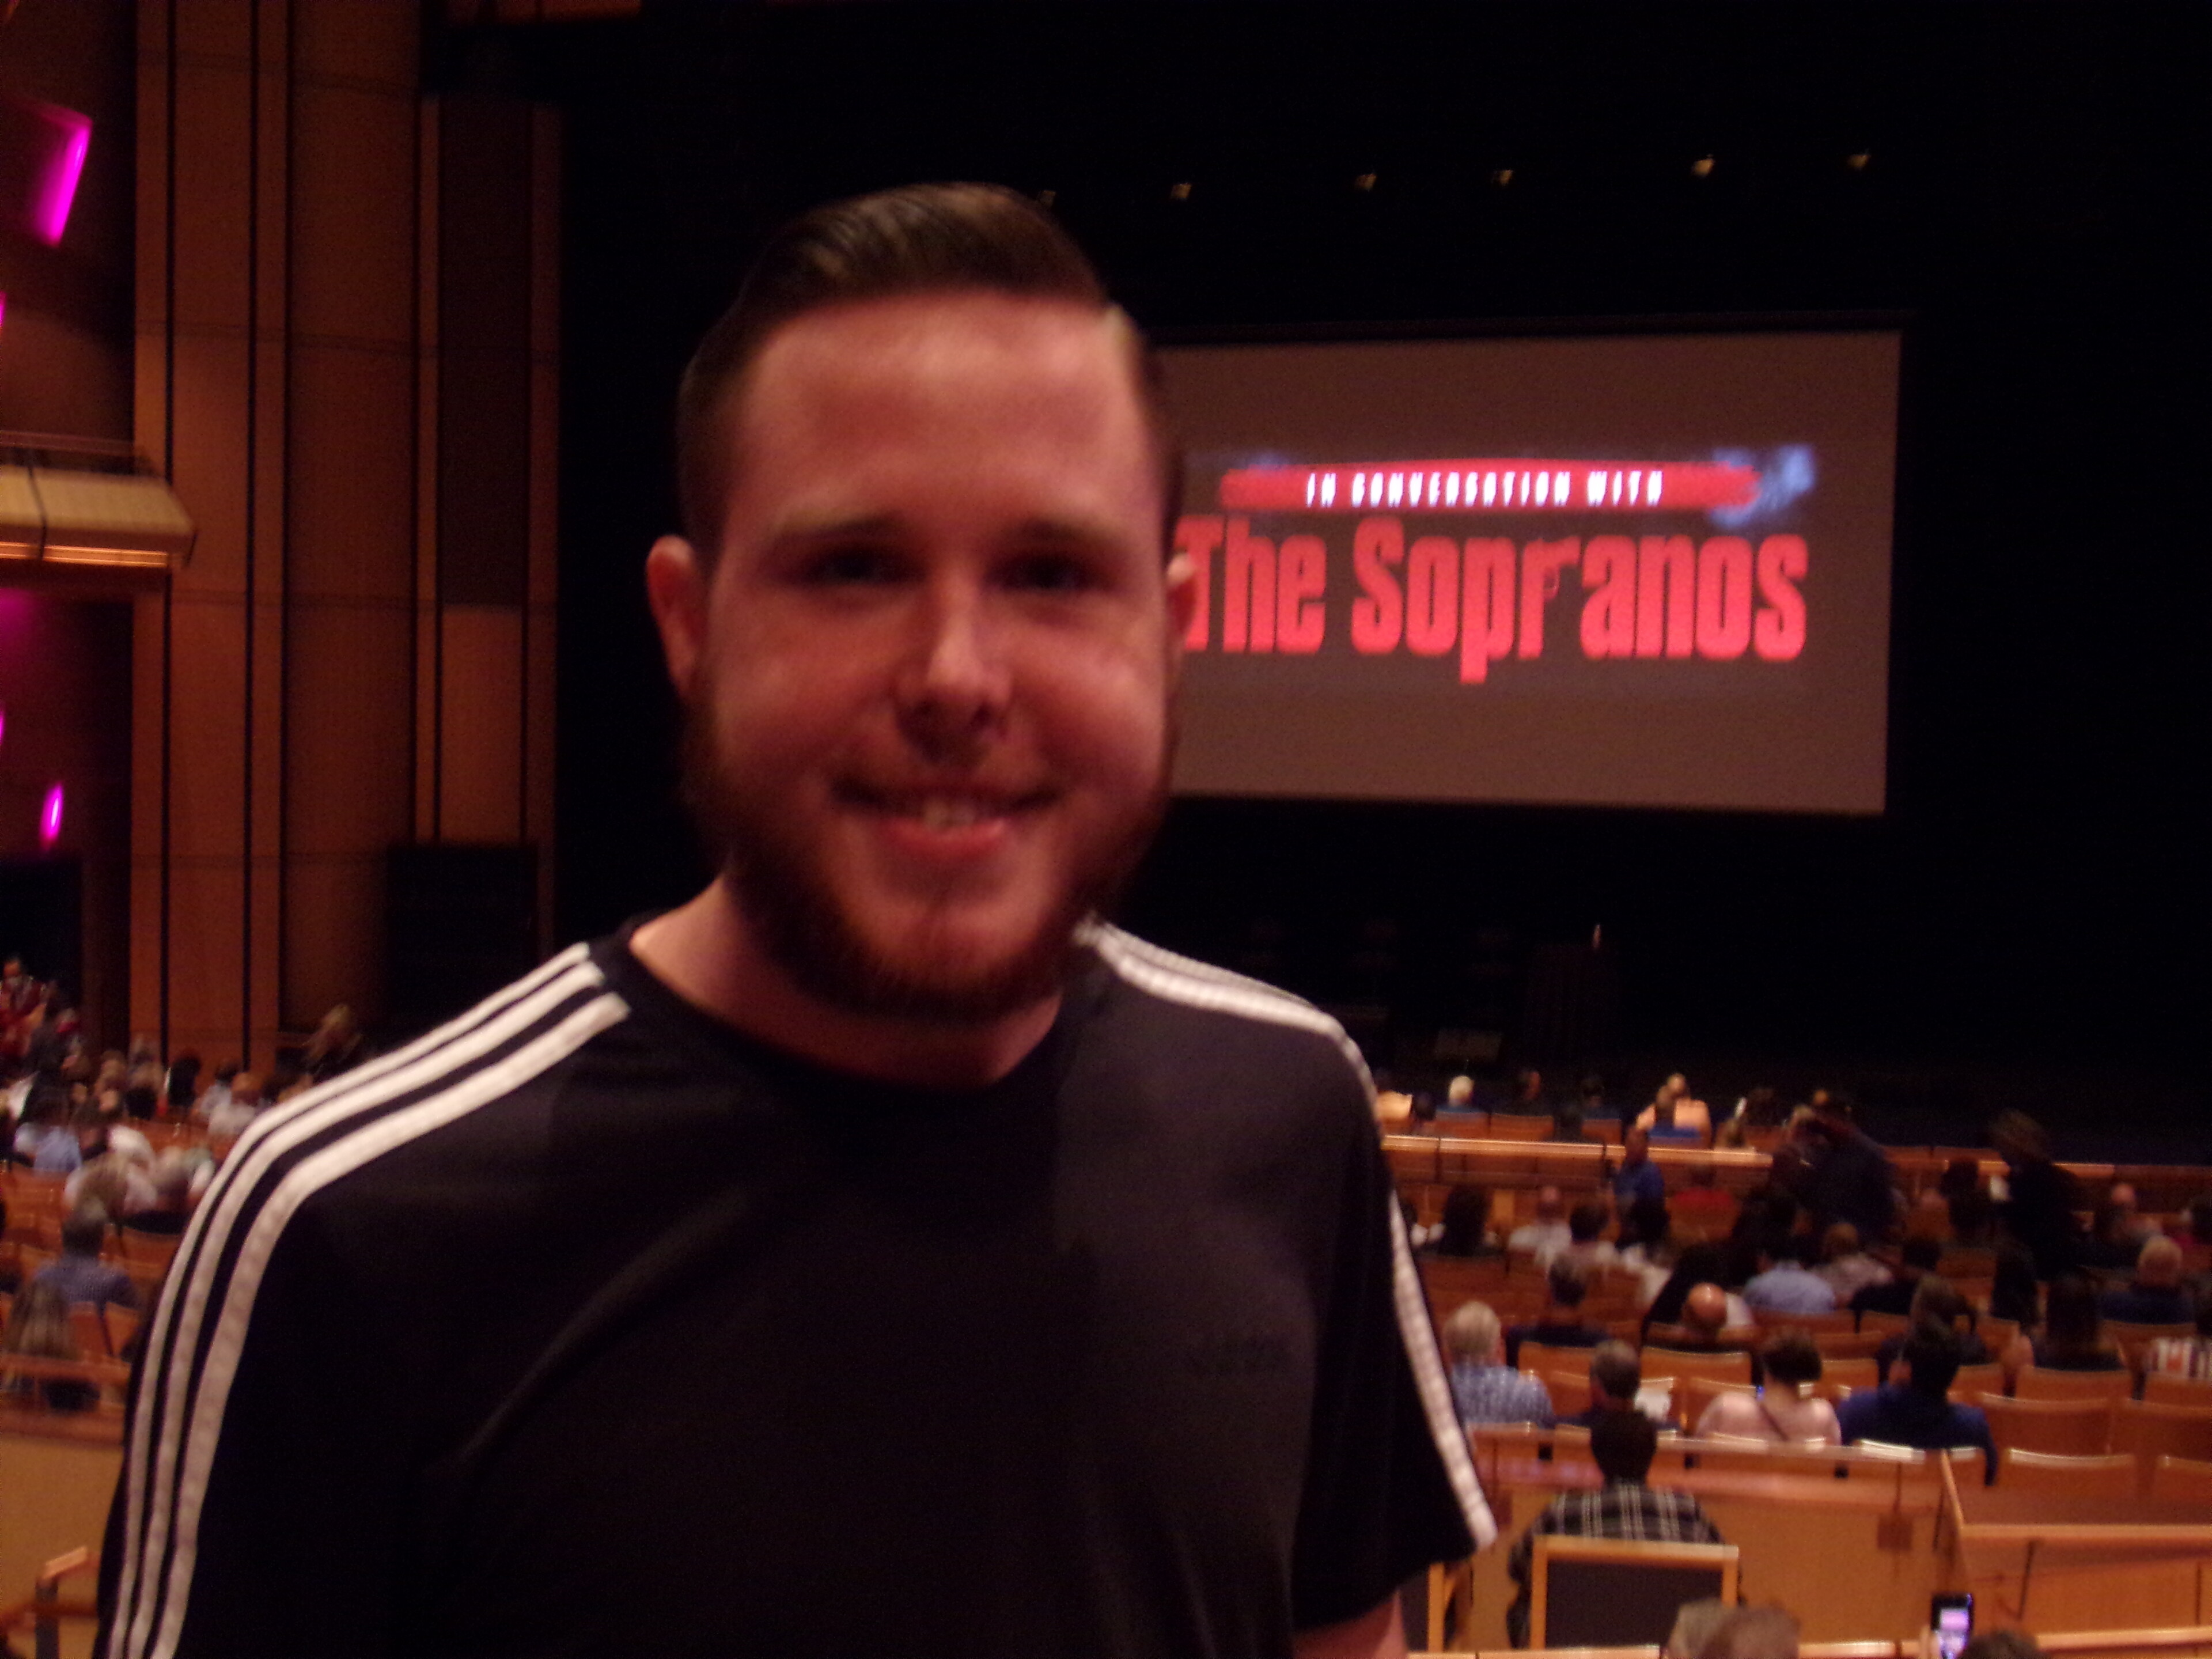 In Conversation with the Sopranos